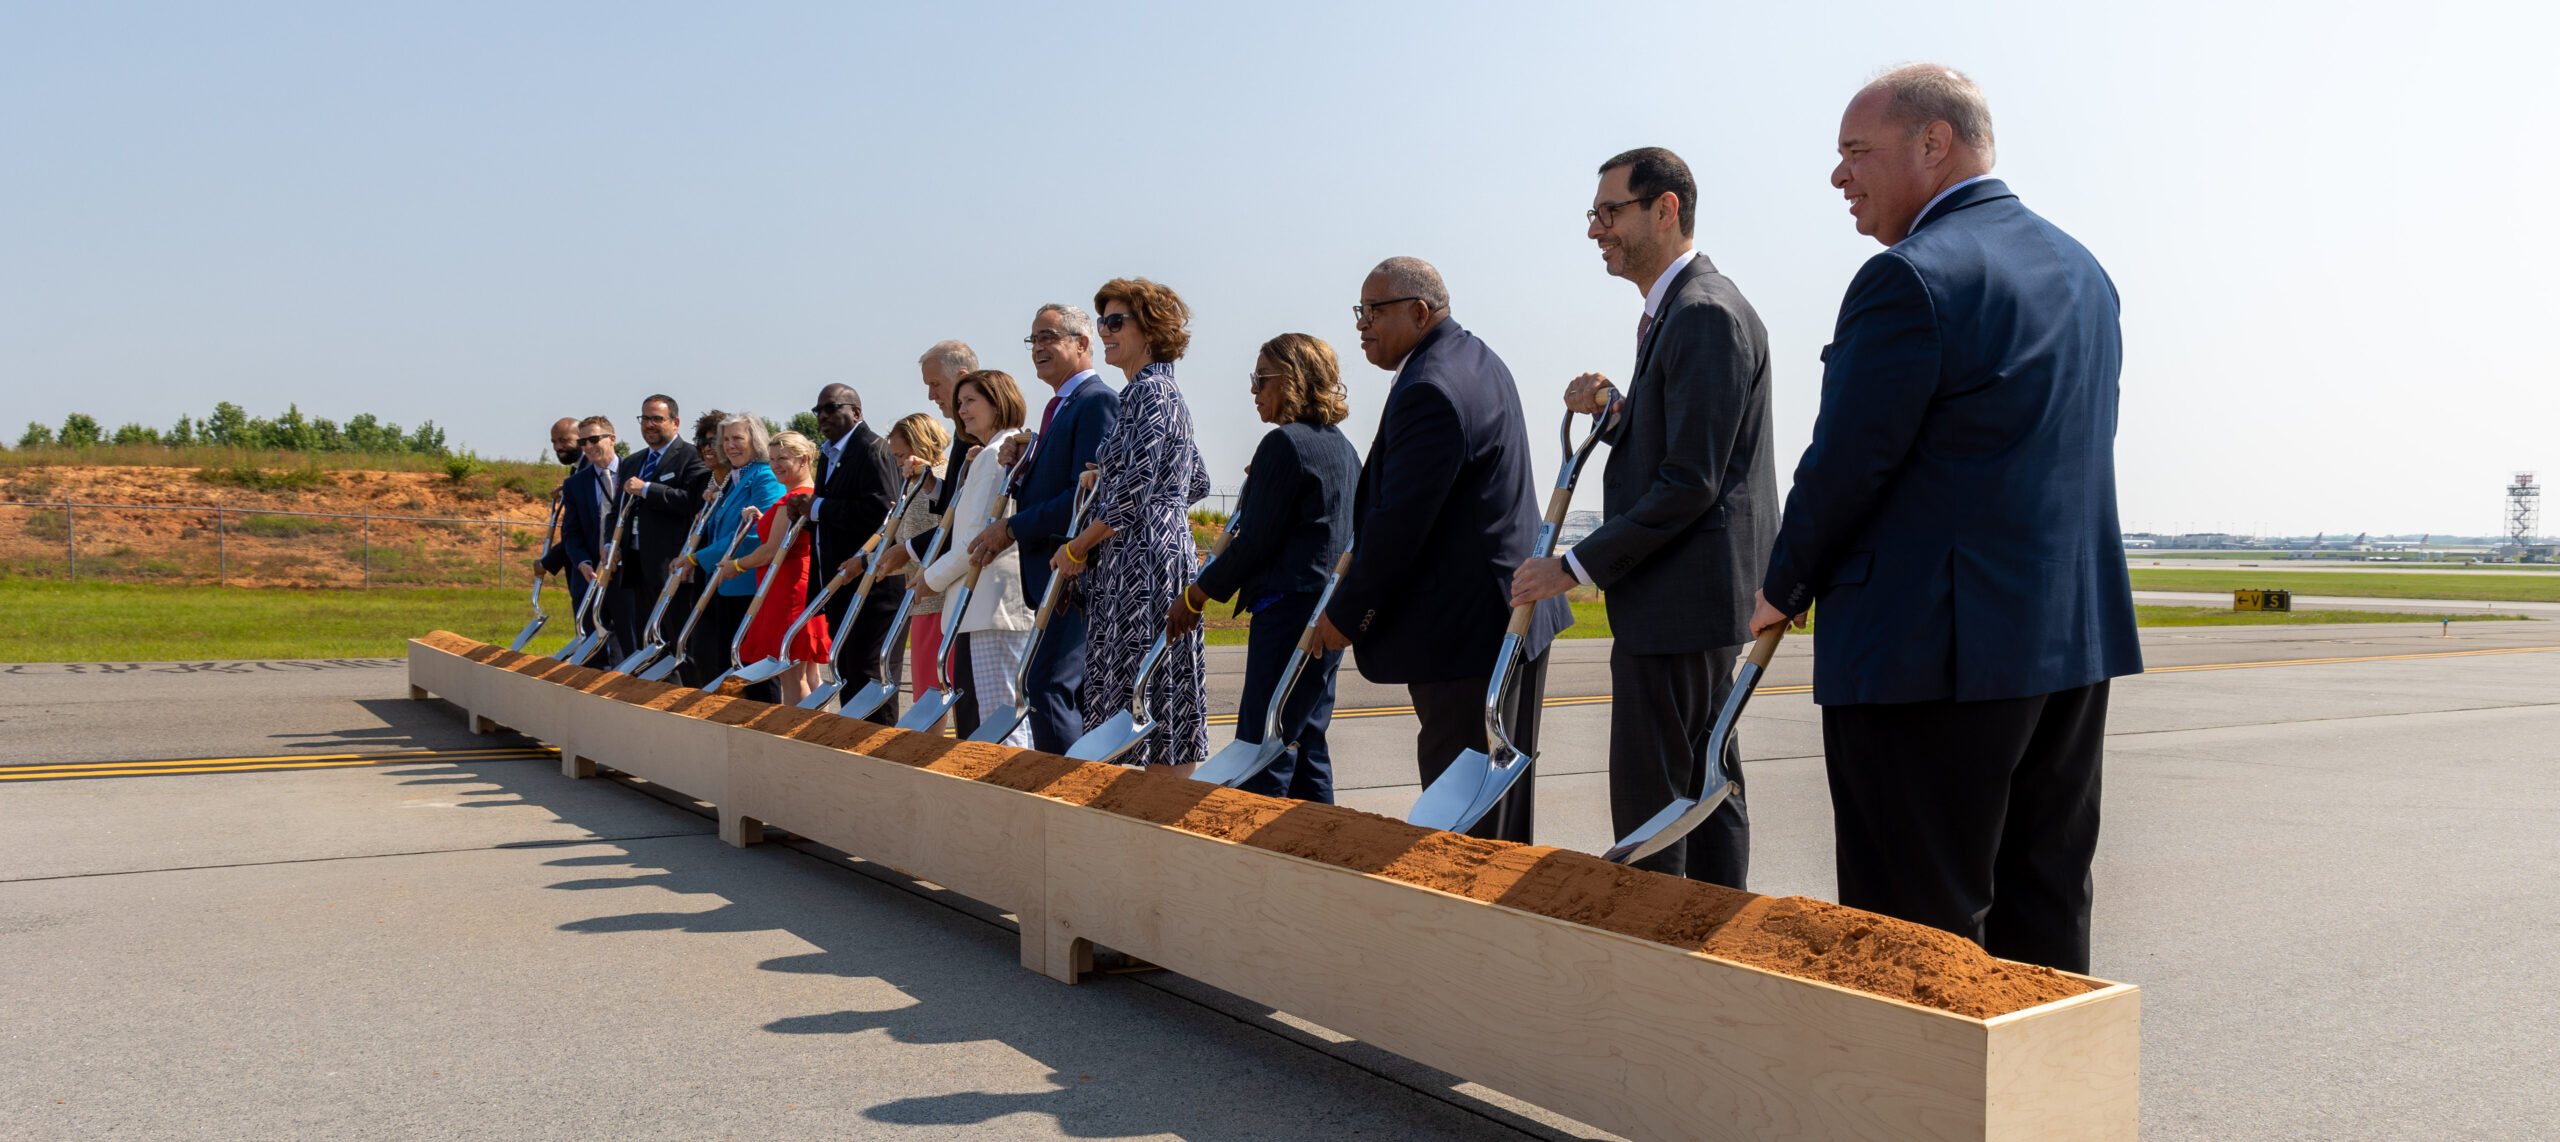 Charlotte Douglas International Airport began the next project under the Destination CLT portfolio with the groundbreaking of CLT’s fourth parallel runway